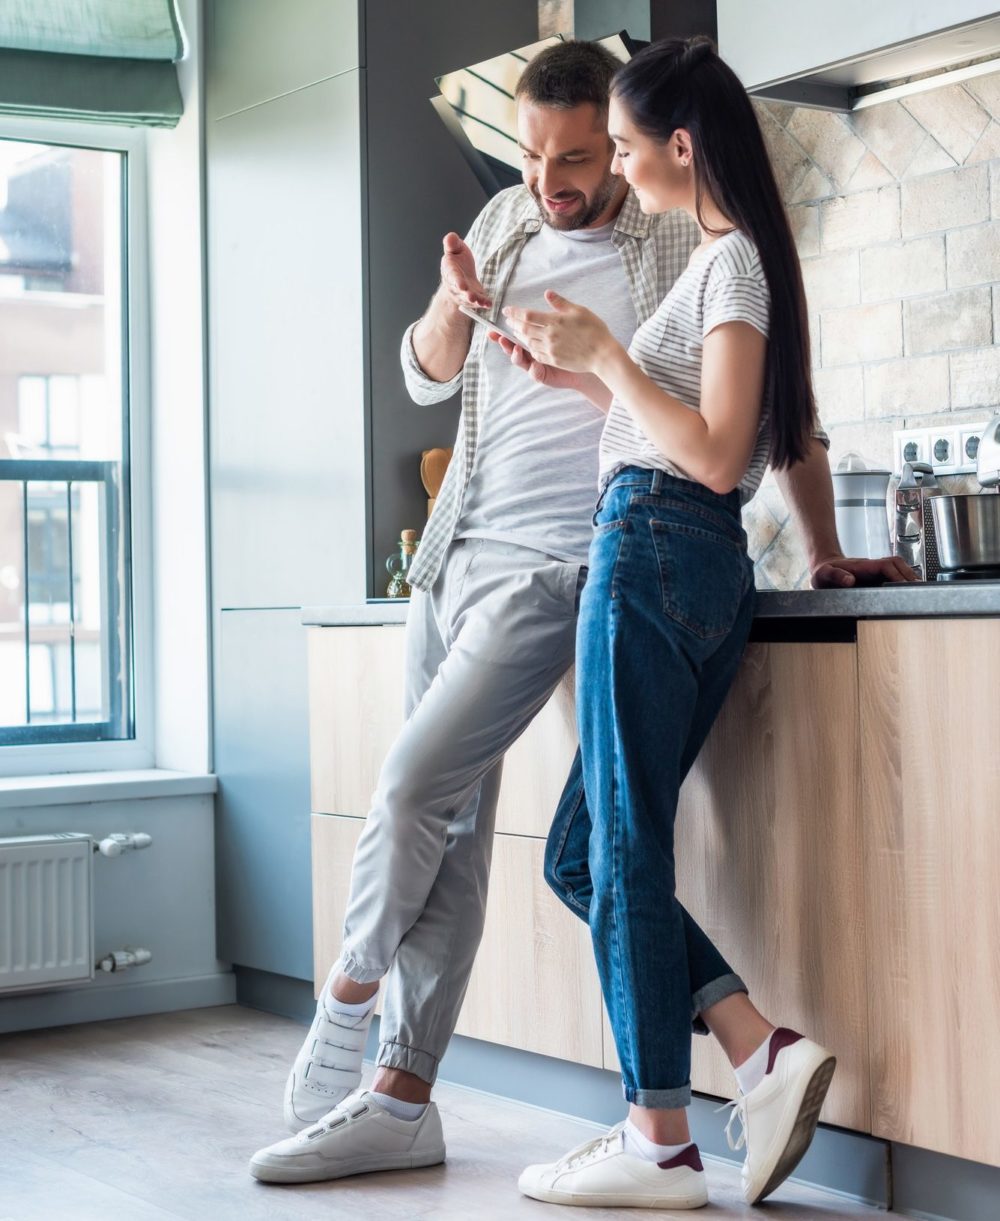 couple using smartphone together in kitchen, smart home concept